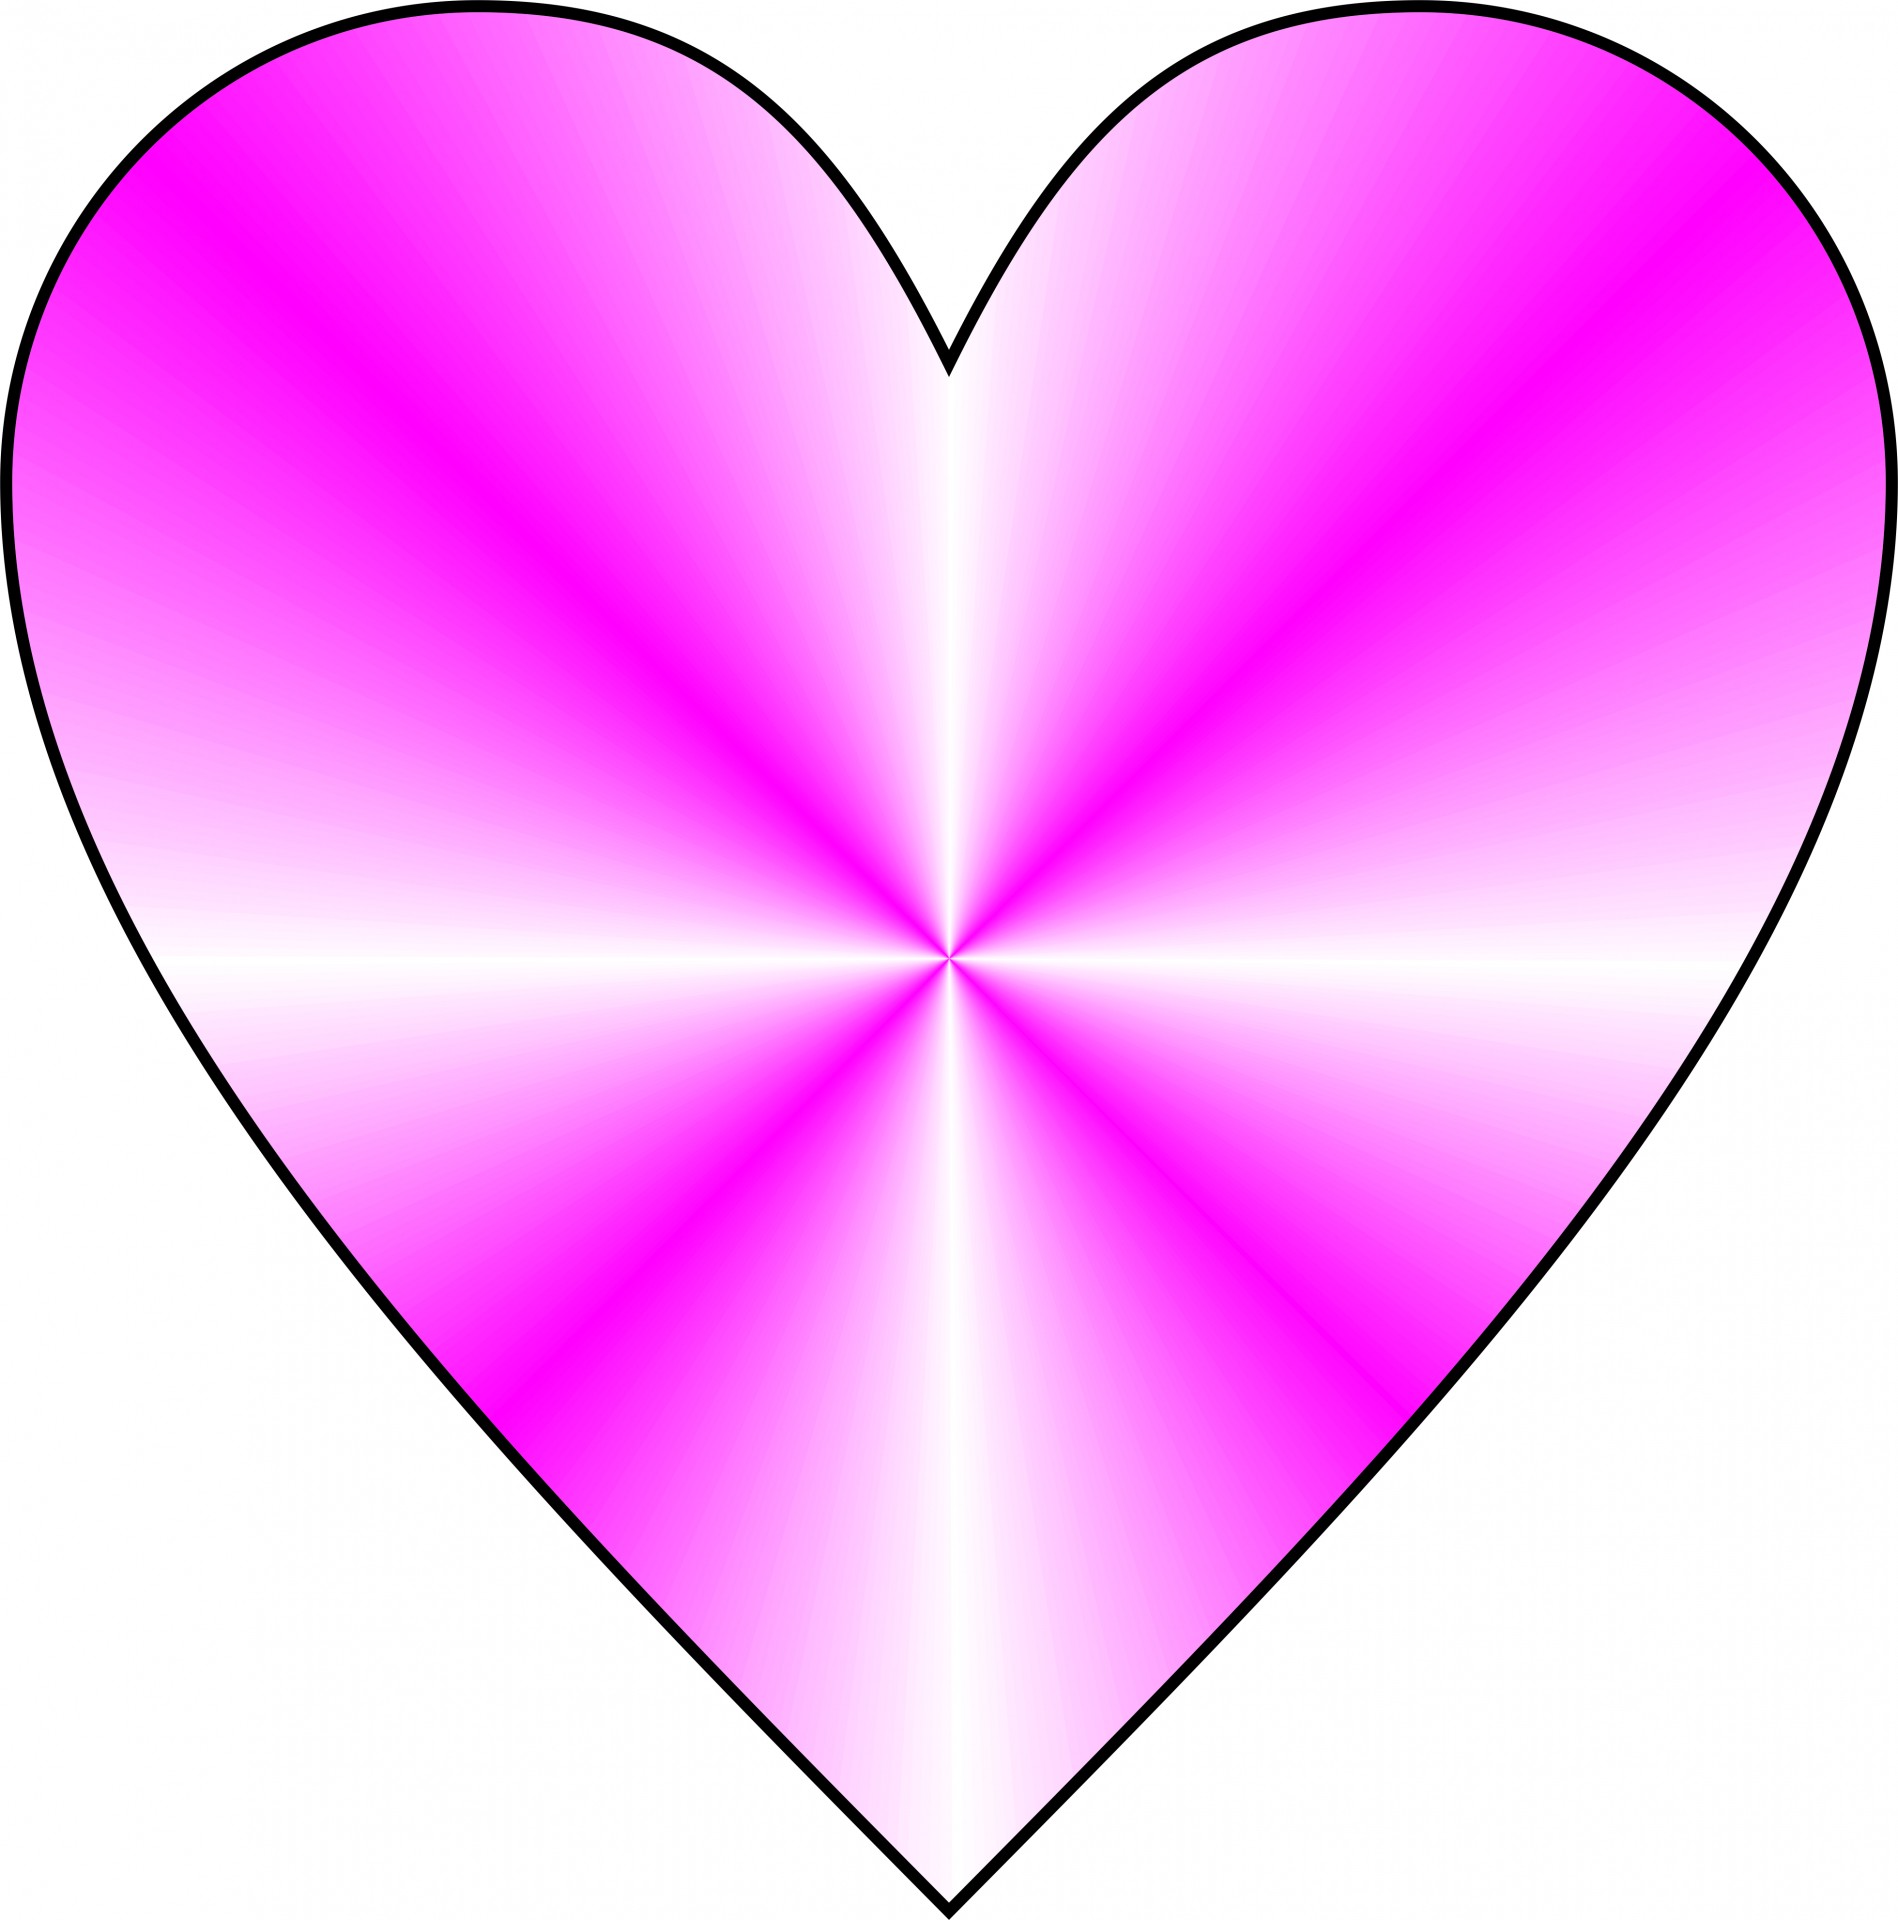 conical magenta heart free photo